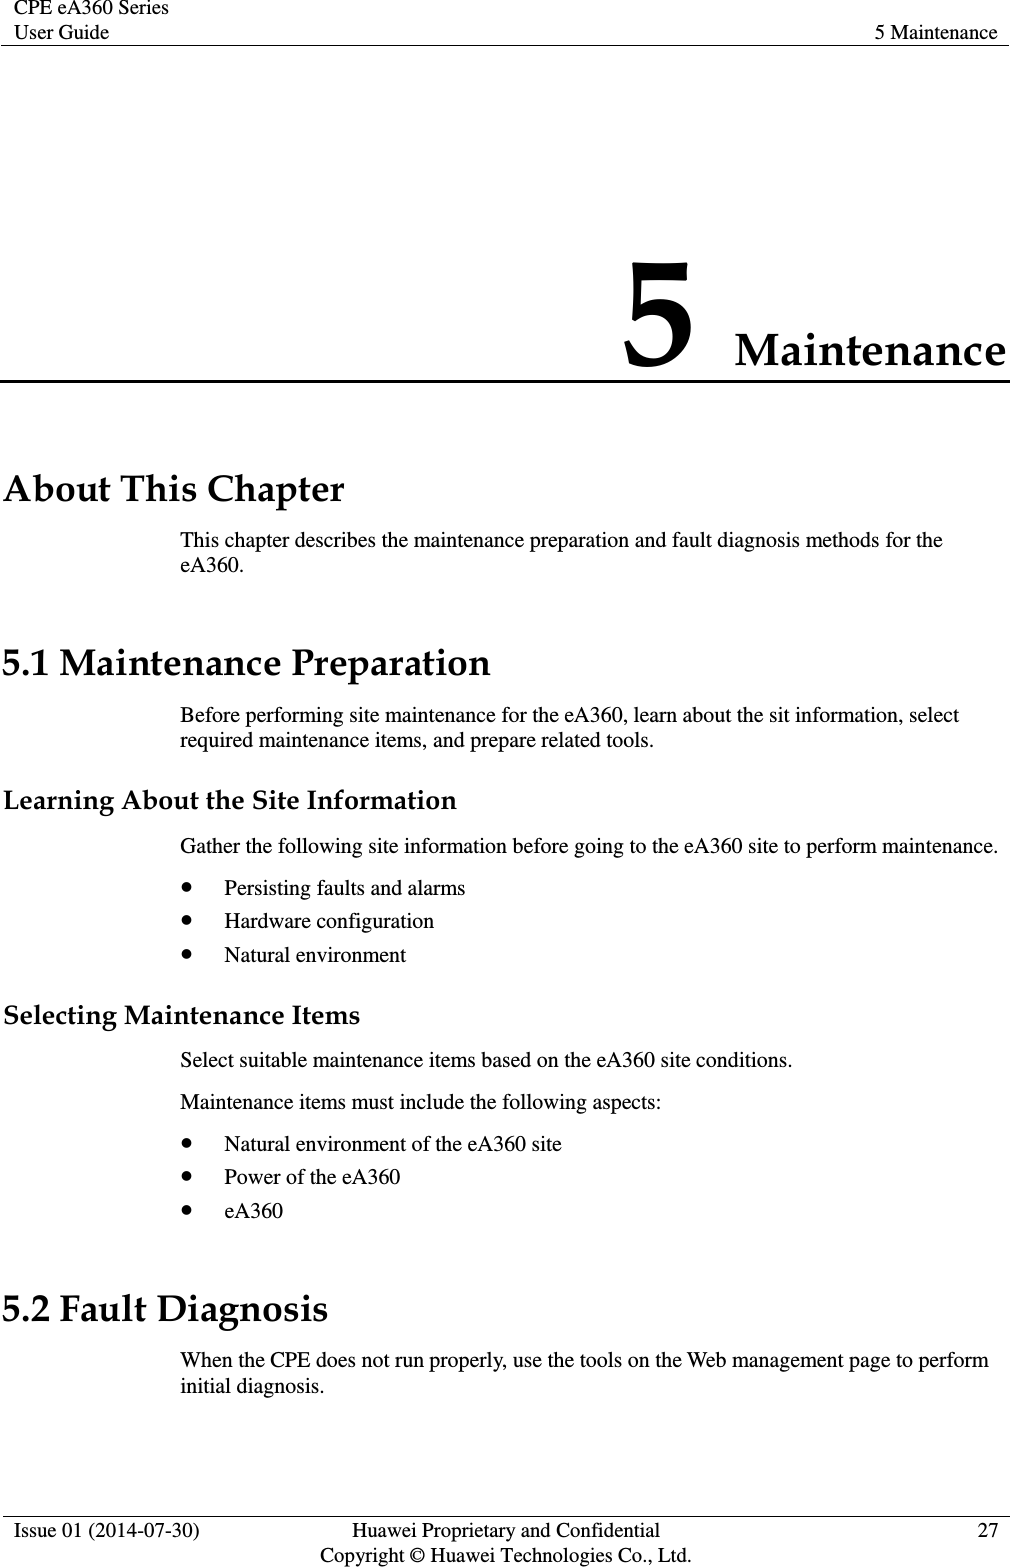 CPE eA360 Series User Guide 5 Maintenance  Issue 01 (2014-07-30) Huawei Proprietary and Confidential                                     Copyright © Huawei Technologies Co., Ltd. 27  5 Maintenance About This Chapter This chapter describes the maintenance preparation and fault diagnosis methods for the eA360. 5.1 Maintenance Preparation Before performing site maintenance for the eA360, learn about the sit information, select required maintenance items, and prepare related tools. Learning About the Site Information Gather the following site information before going to the eA360 site to perform maintenance.    Persisting faults and alarms  Hardware configuration  Natural environment Selecting Maintenance Items Select suitable maintenance items based on the eA360 site conditions.   Maintenance items must include the following aspects:  Natural environment of the eA360 site  Power of the eA360  eA360 5.2 Fault Diagnosis When the CPE does not run properly, use the tools on the Web management page to perform initial diagnosis. 